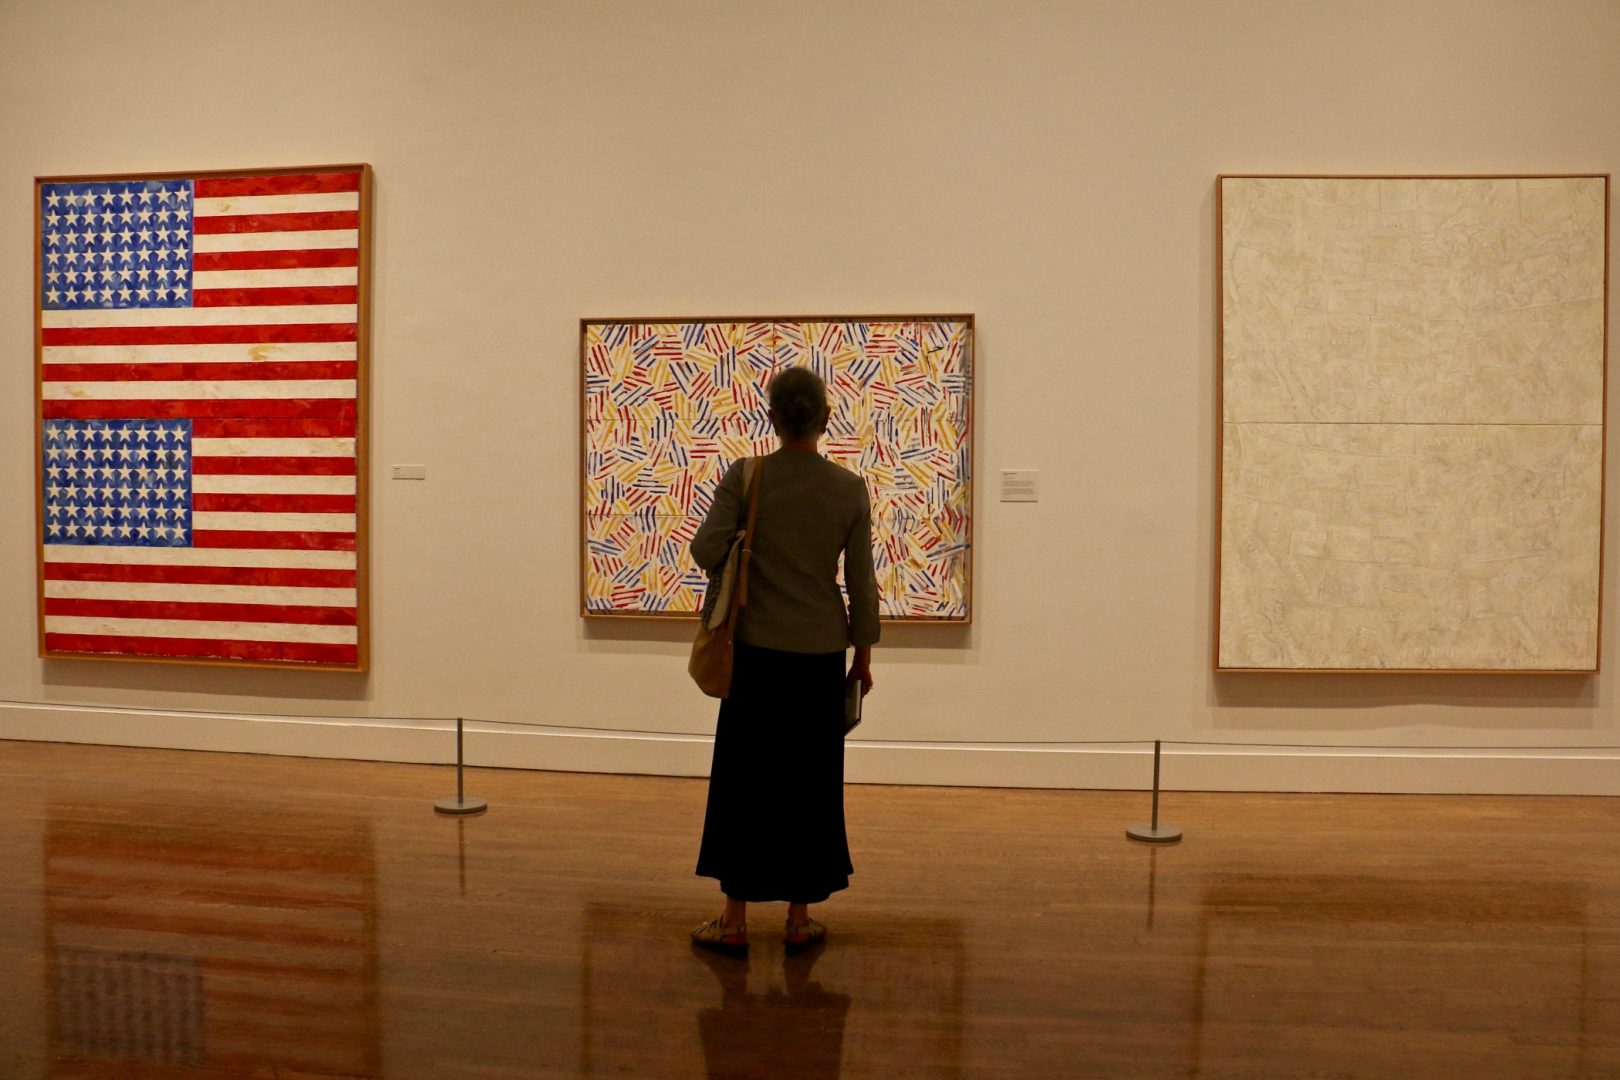 A lifetime retrospective of the work of Jasper Johns, organized by the Philadelphia Museum of Art and the Whitney Museum of American Art, is being presented simultaneously at both institutions. Visitors who attend the exhibition at one venue will get half-price admission to the other.